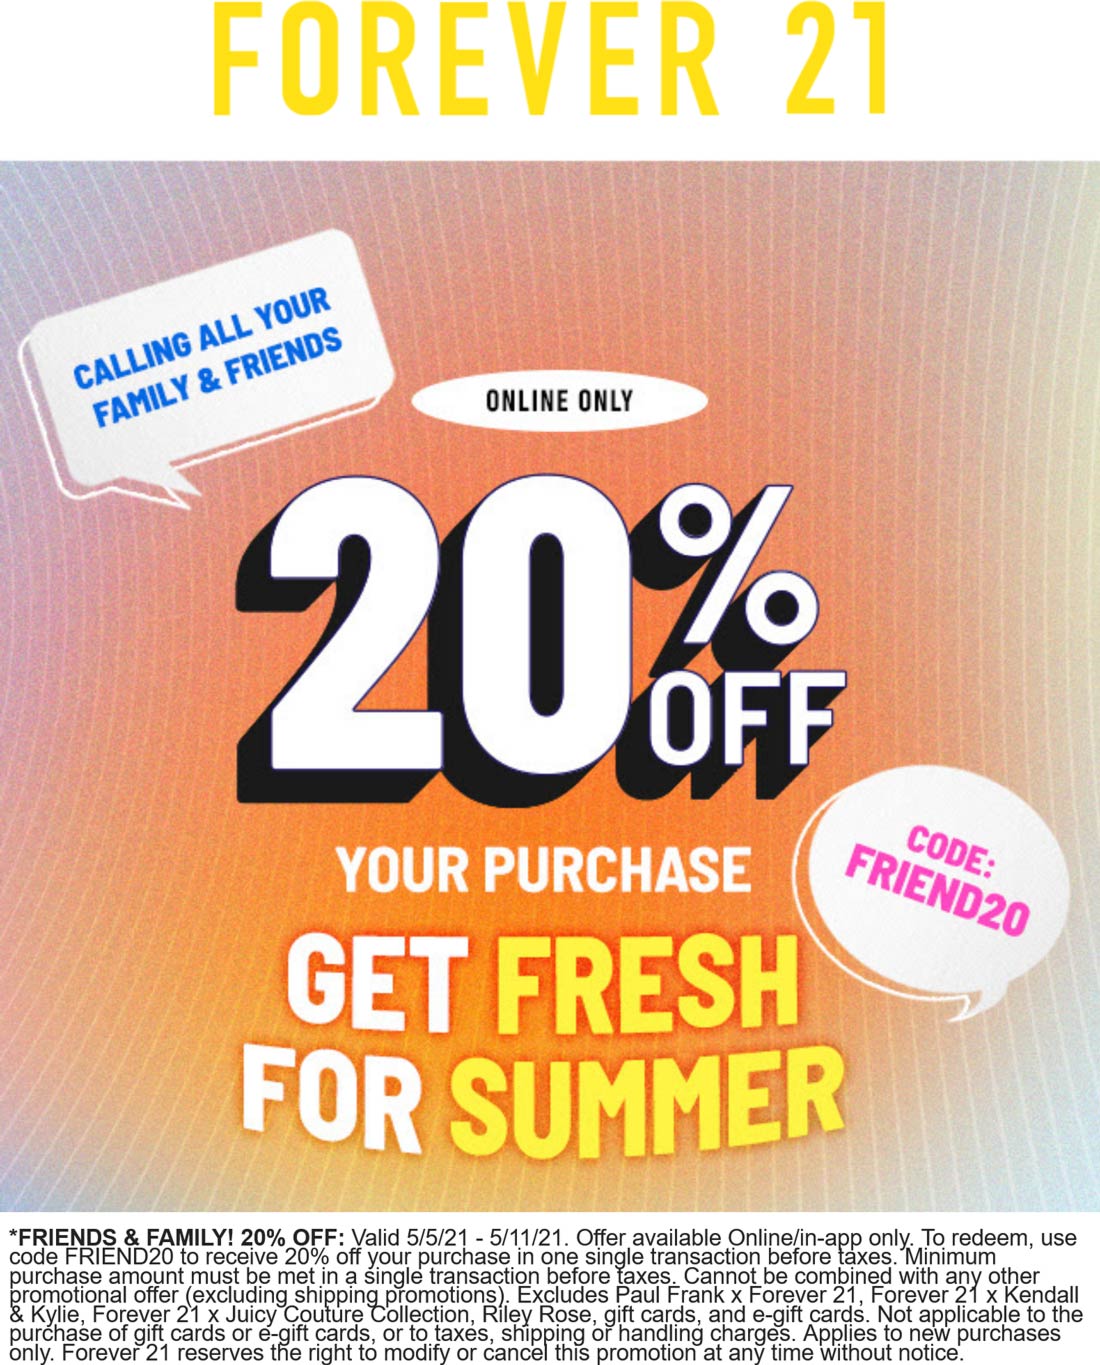 20 off online at Forever 21 via promo code FRIEND20 forever21 The